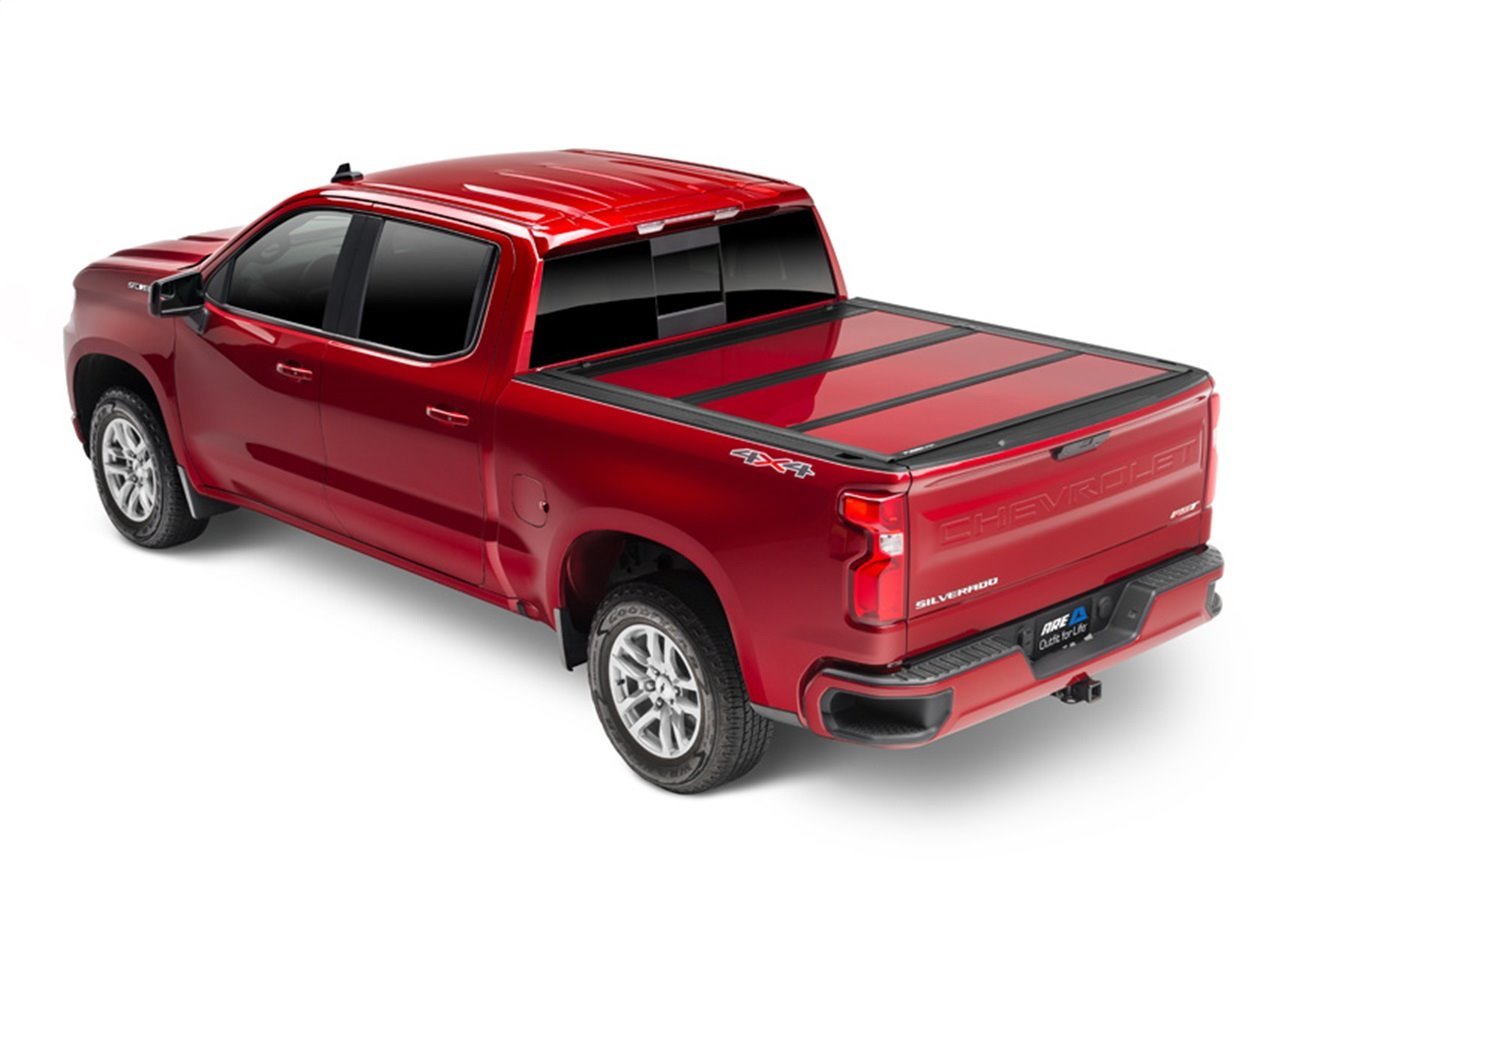 Fusion Tonneau Cover Fits Select Dodge Ram 1500 [Bed: 5 ft. 7 in.]